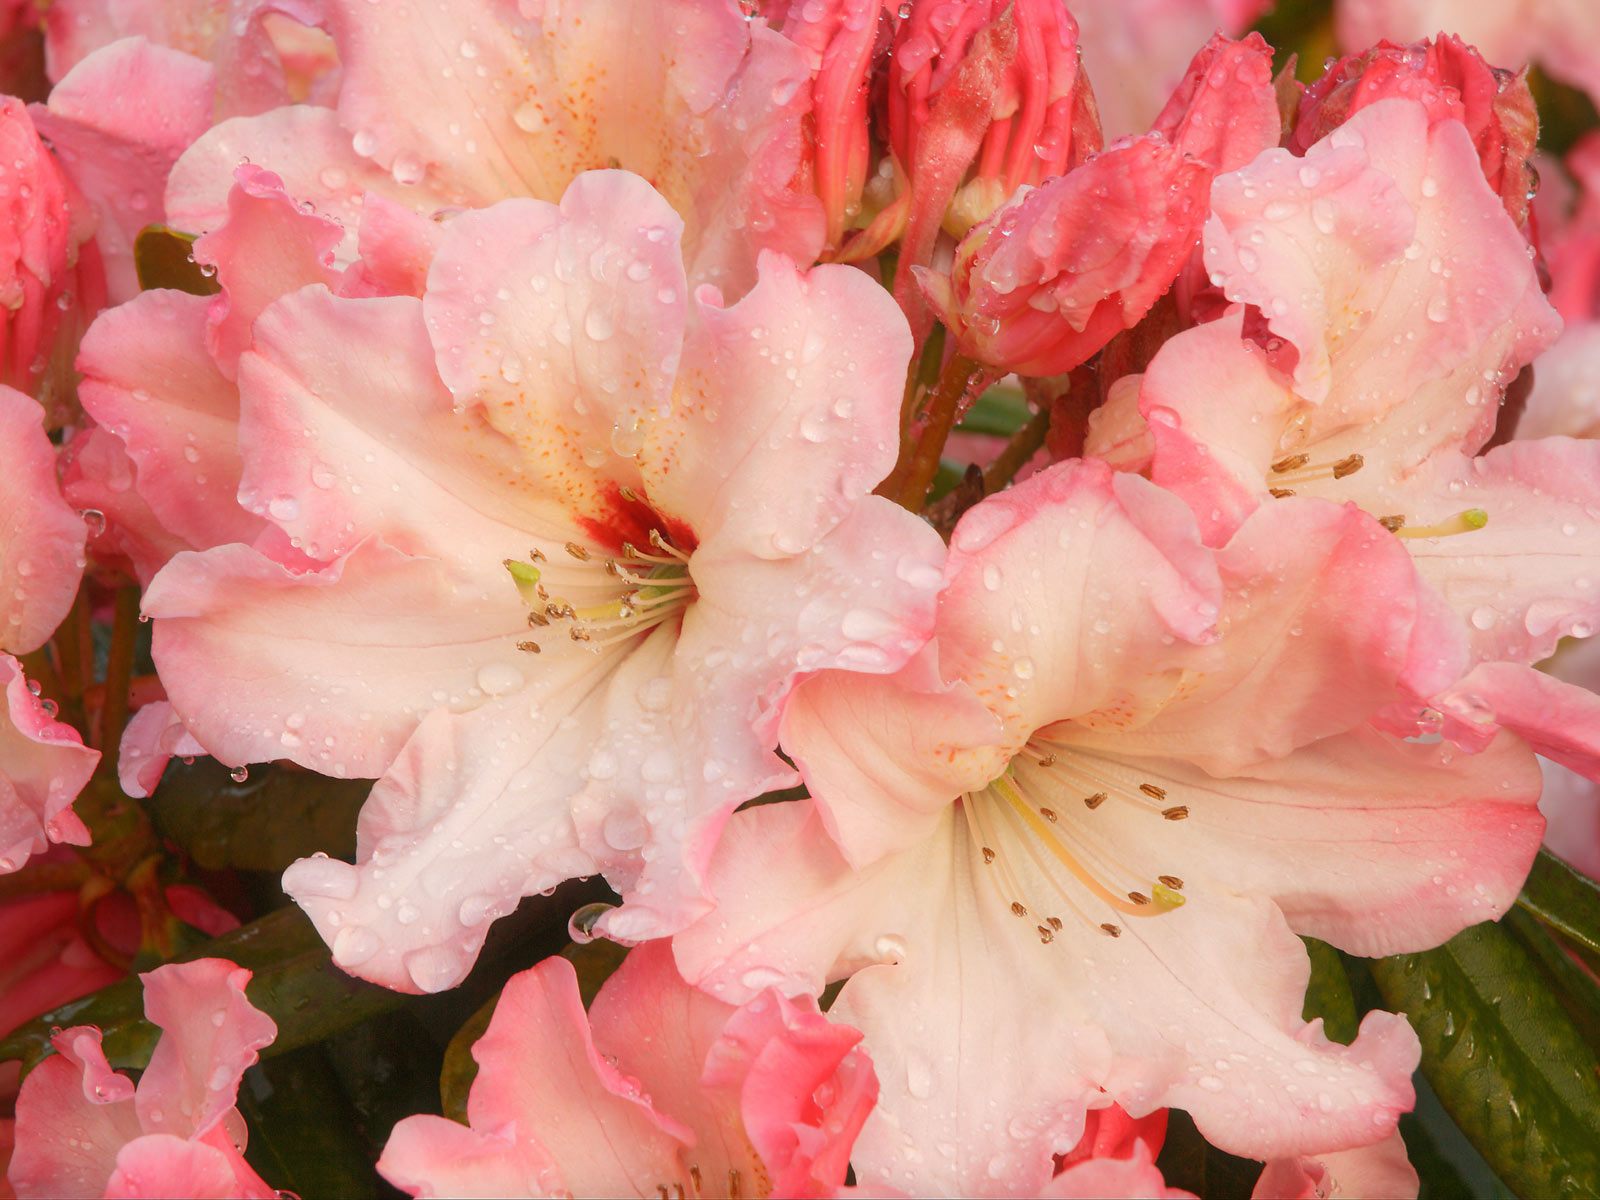 Rhododendron_Blossoms.jpg